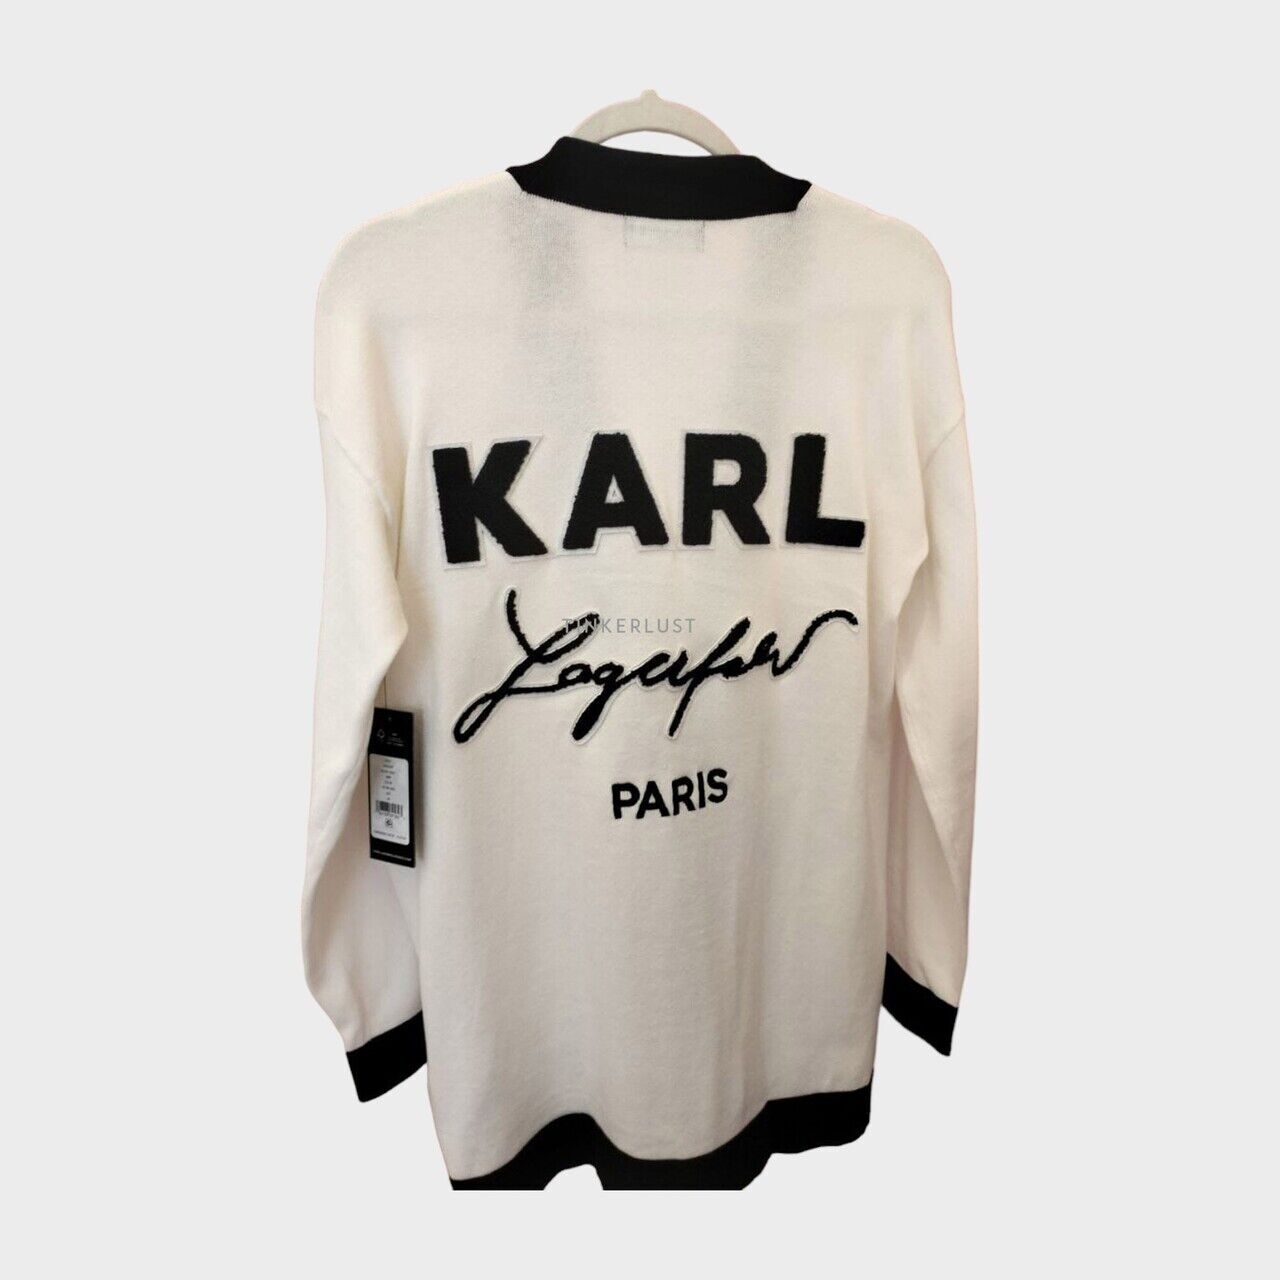 Karl Lagerfeld With Two Pockets in White Ivory & Black Cardigan